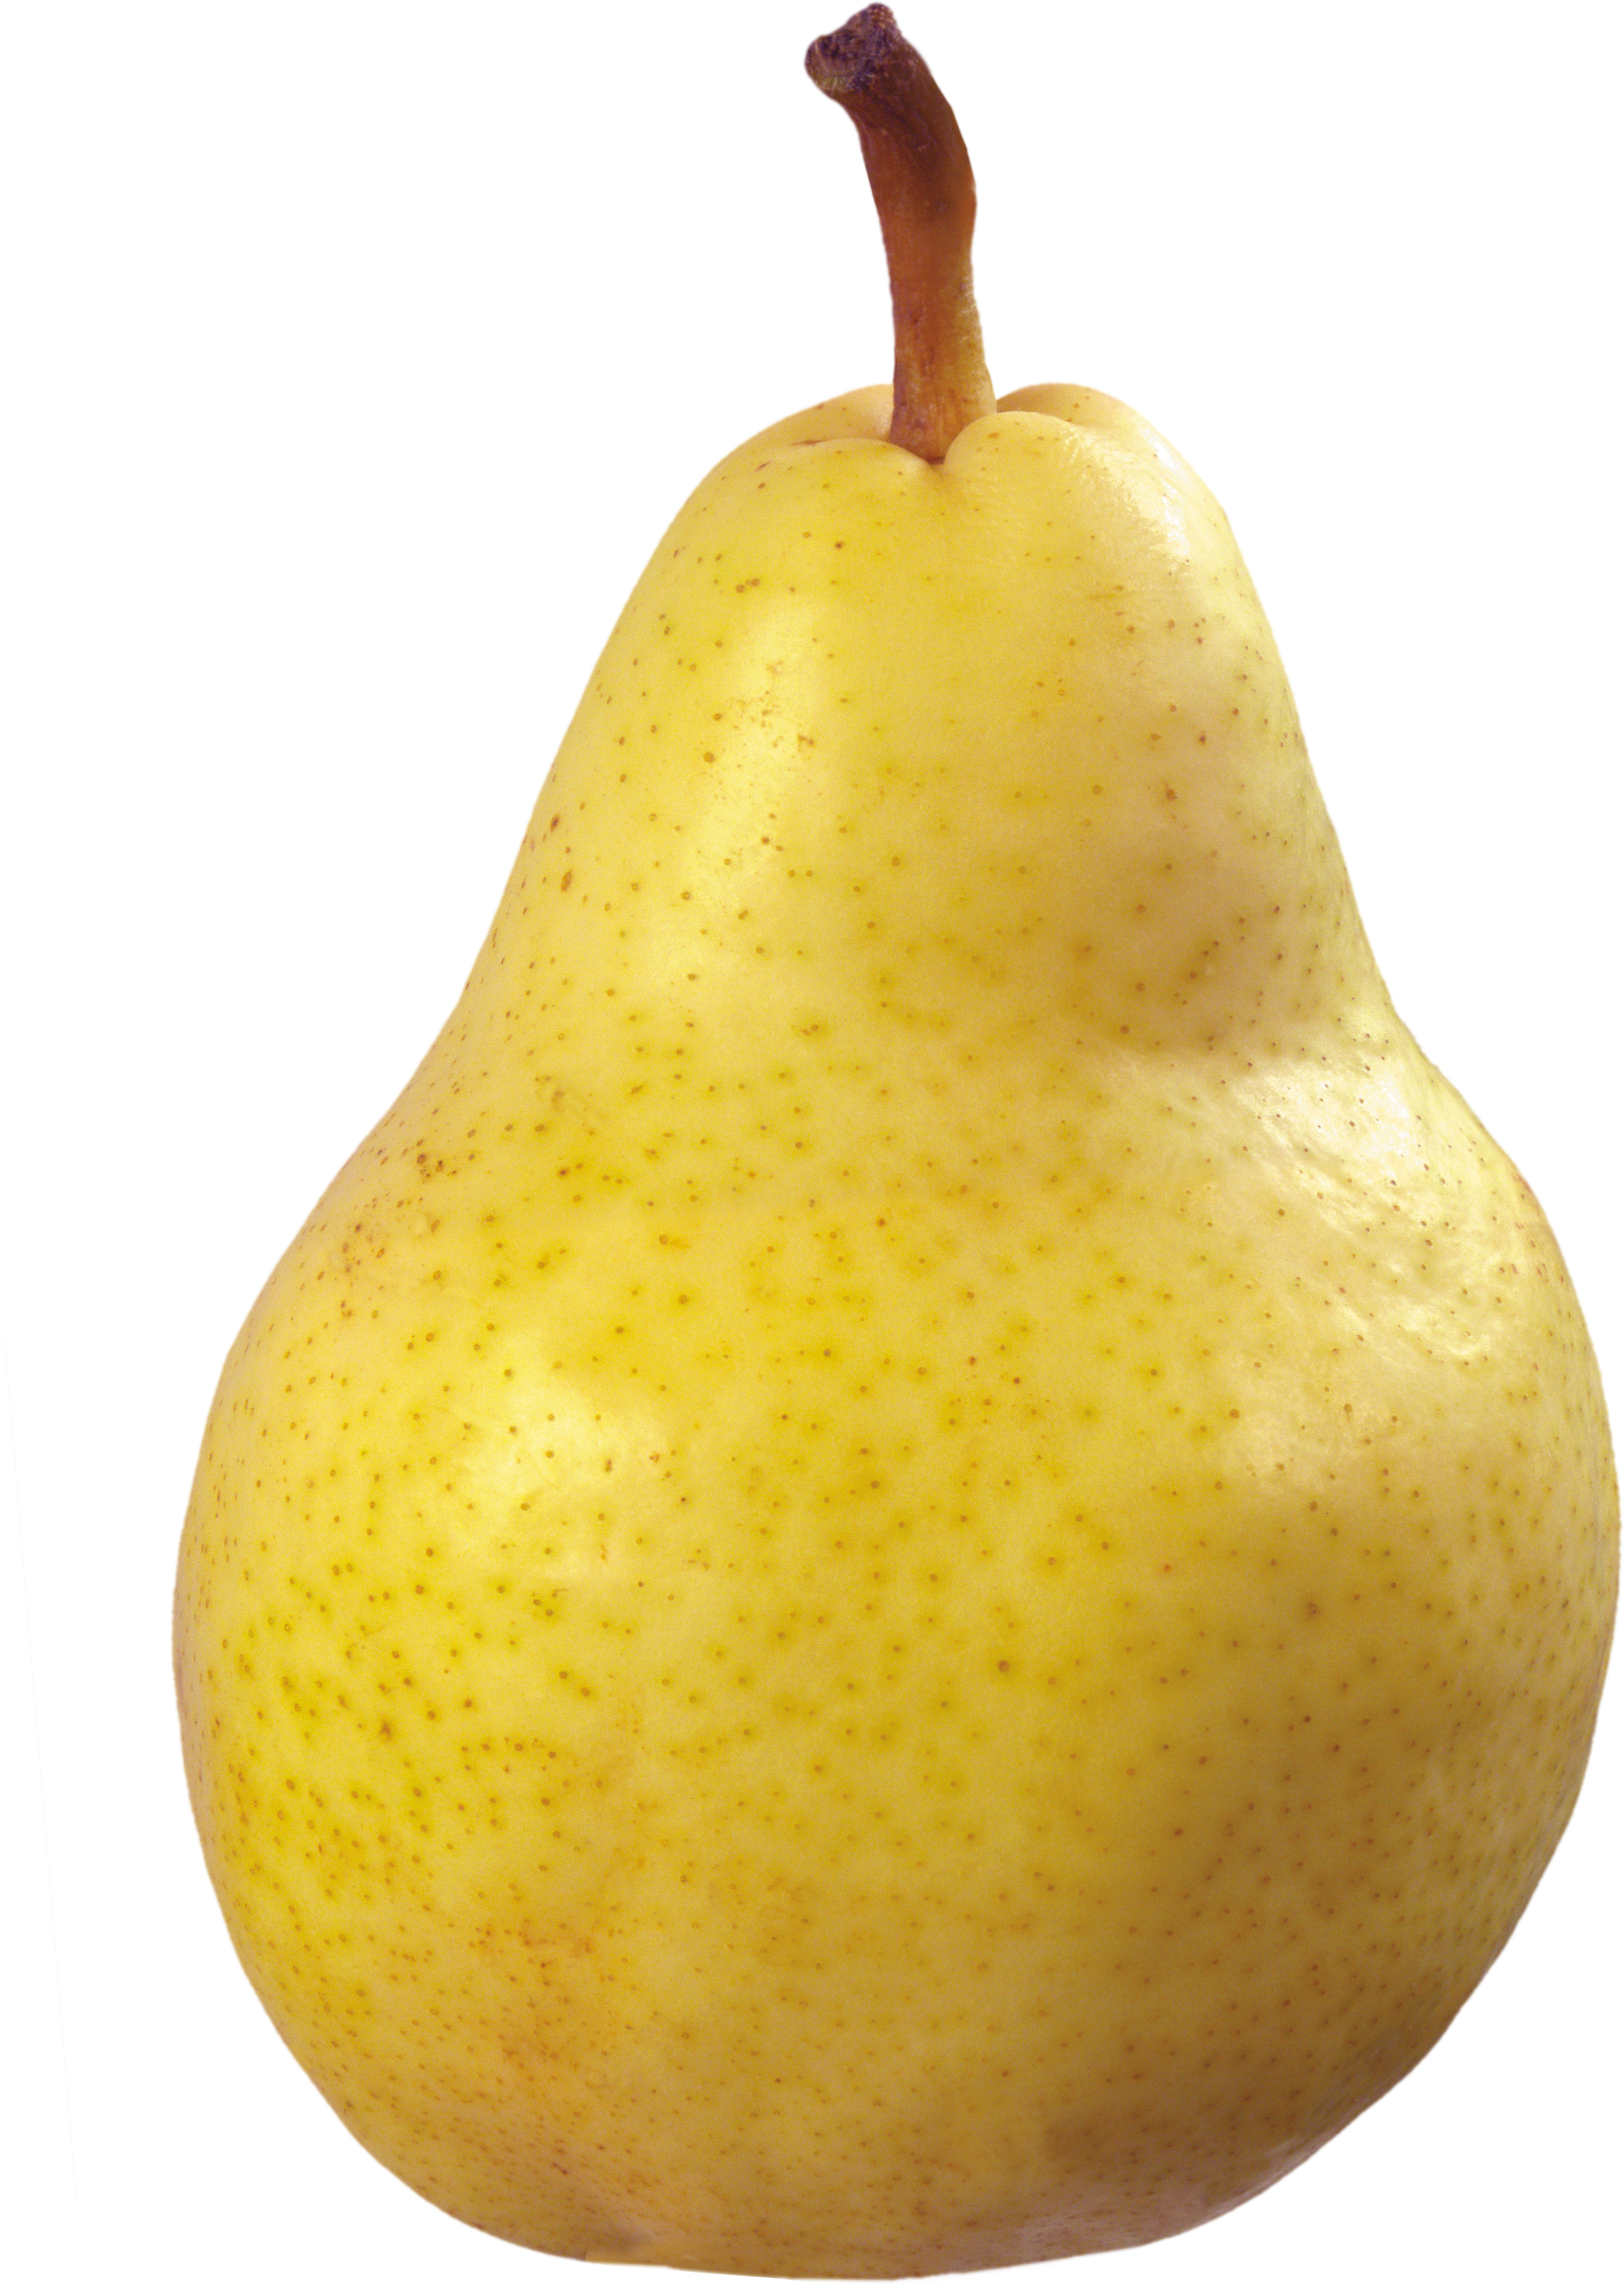 Yellow pear PNG image